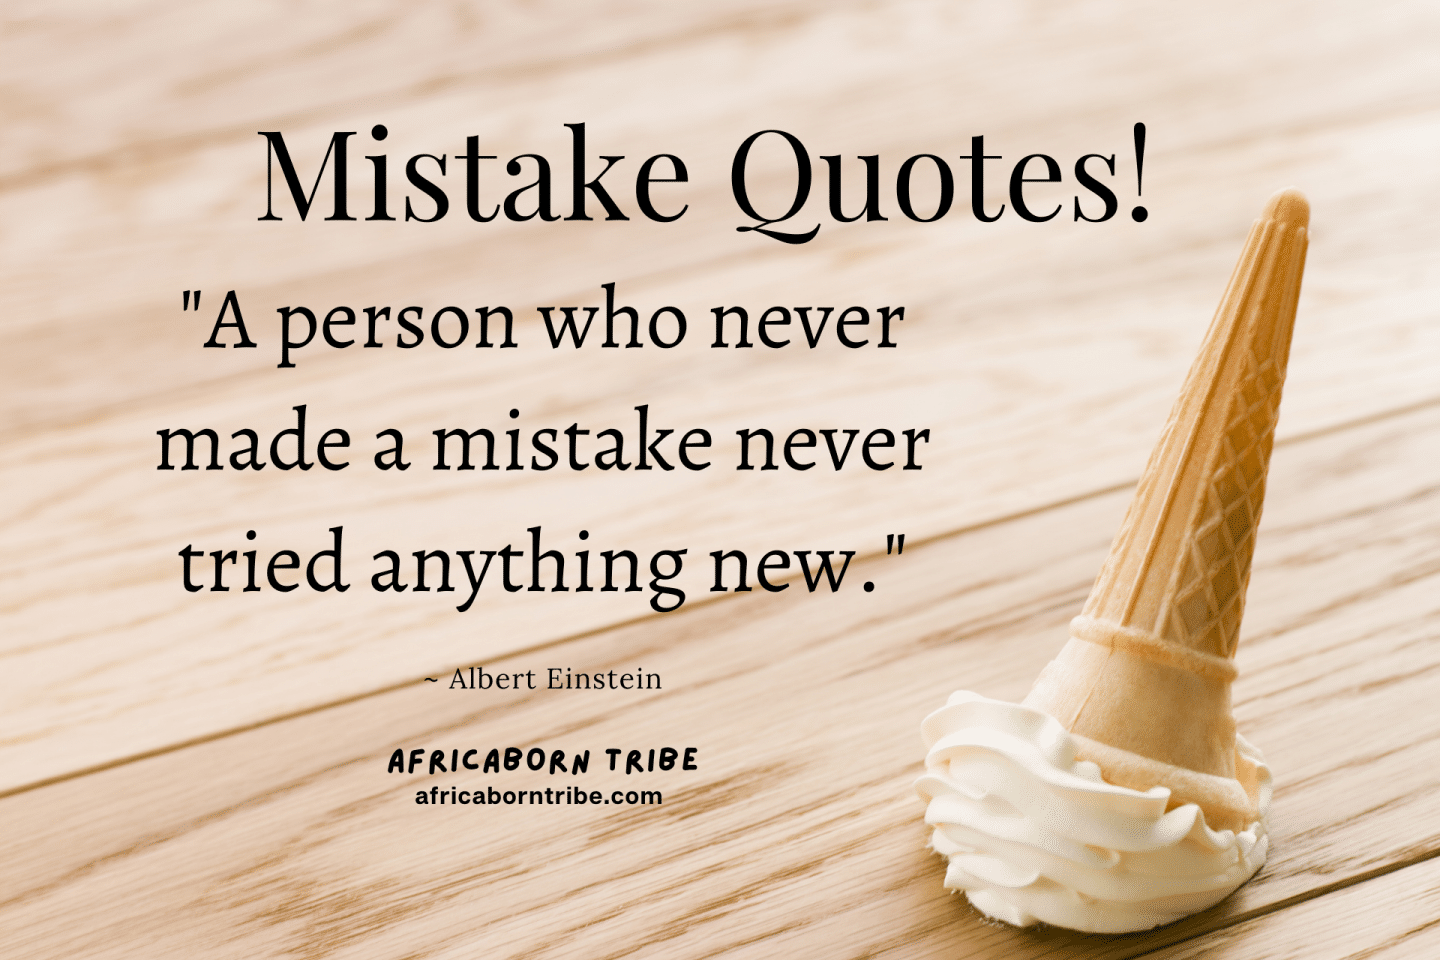 Mistake quotes